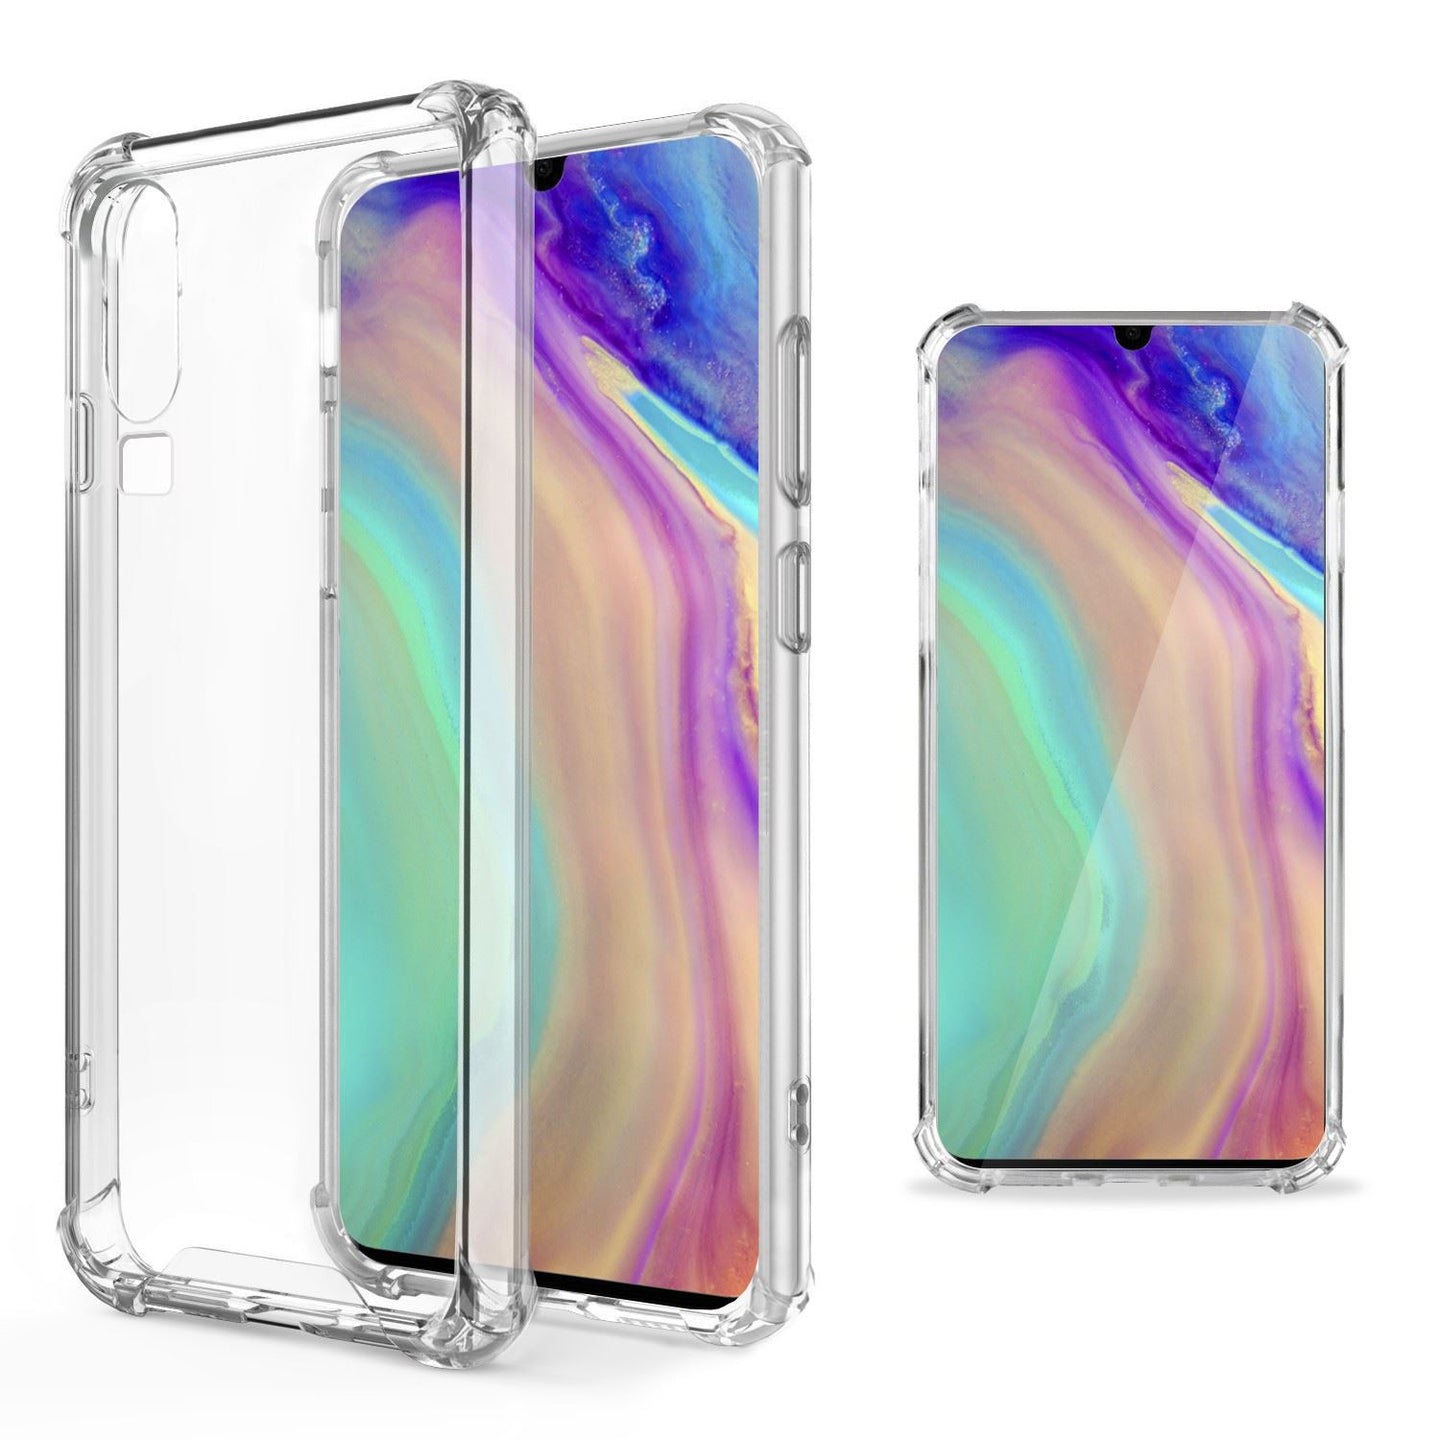 Moozy Shock Proof Silicone Case for Huawei P30 - Transparent Crystal Clear Phone Case Soft TPU Cover